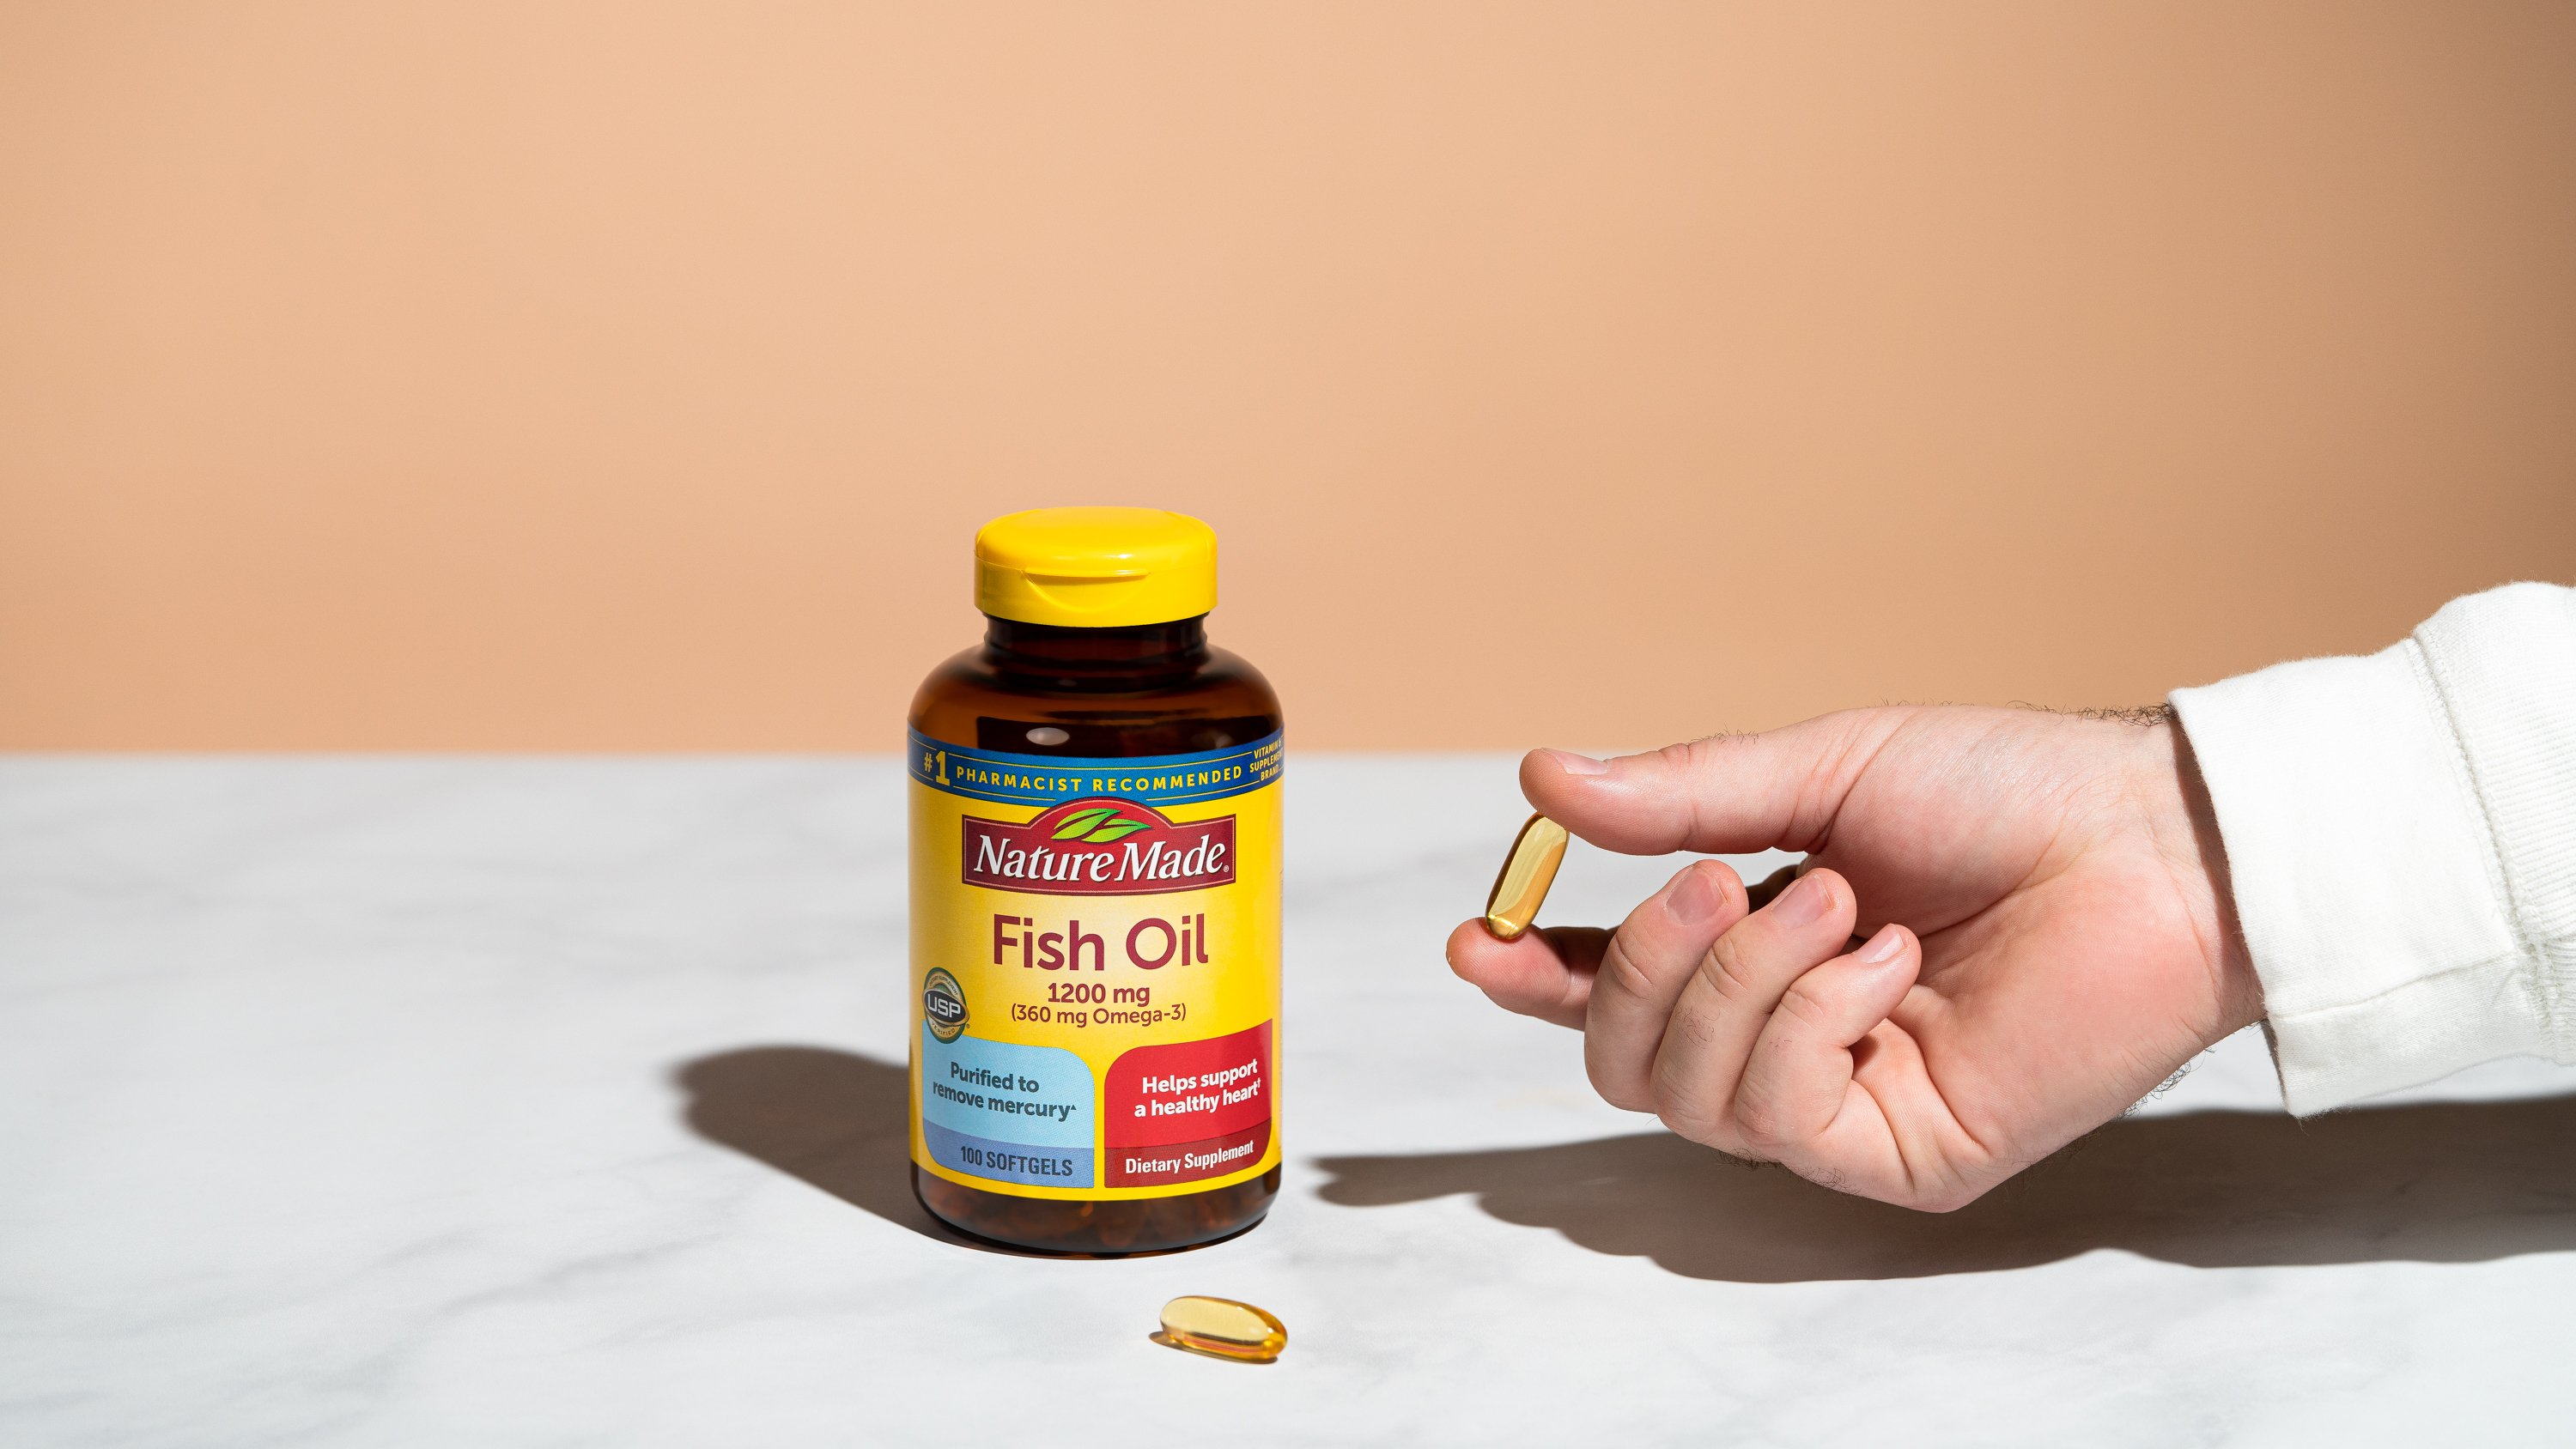 Fish Oil Vs. Omega-3: Which Is the Better Supplement Option